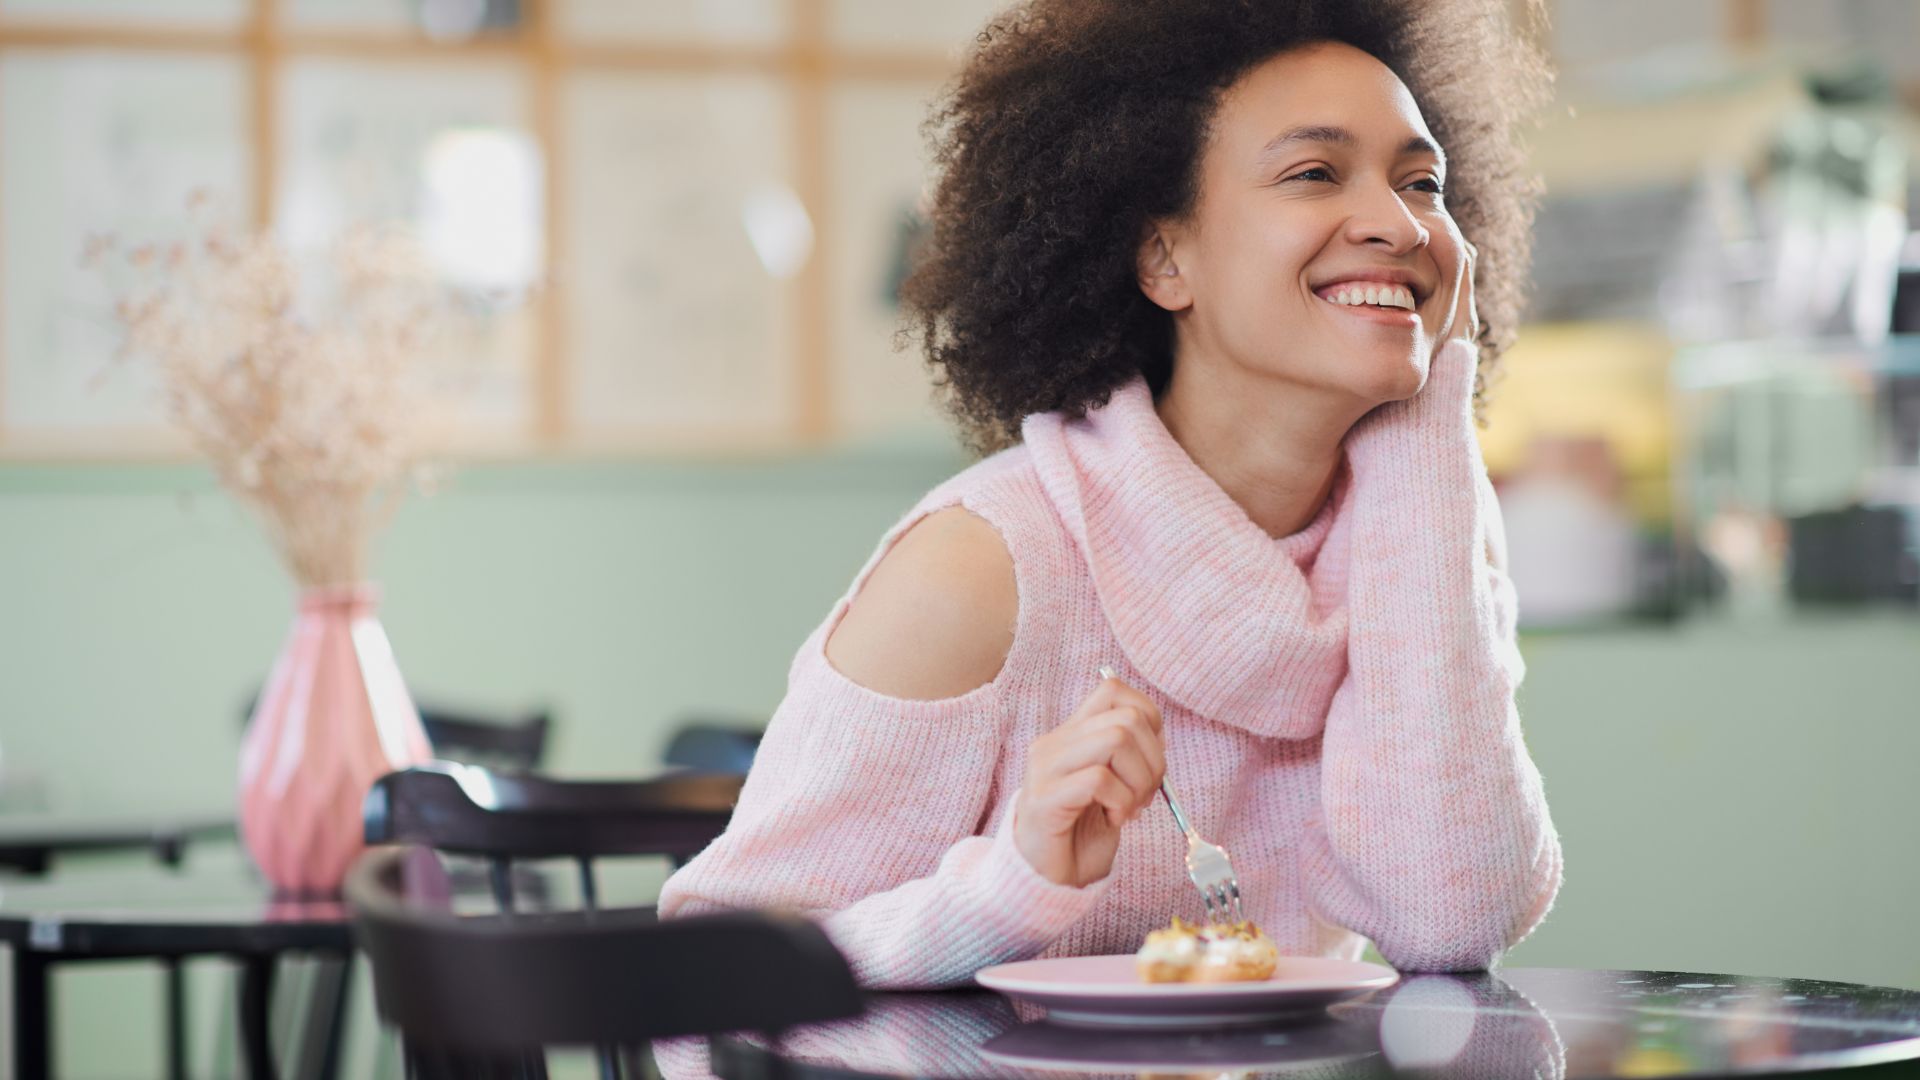 A woman smiles into the distance while spearing a piece of her dessert with a fork. Image to demonstrate you can lose weight while eating dessert.